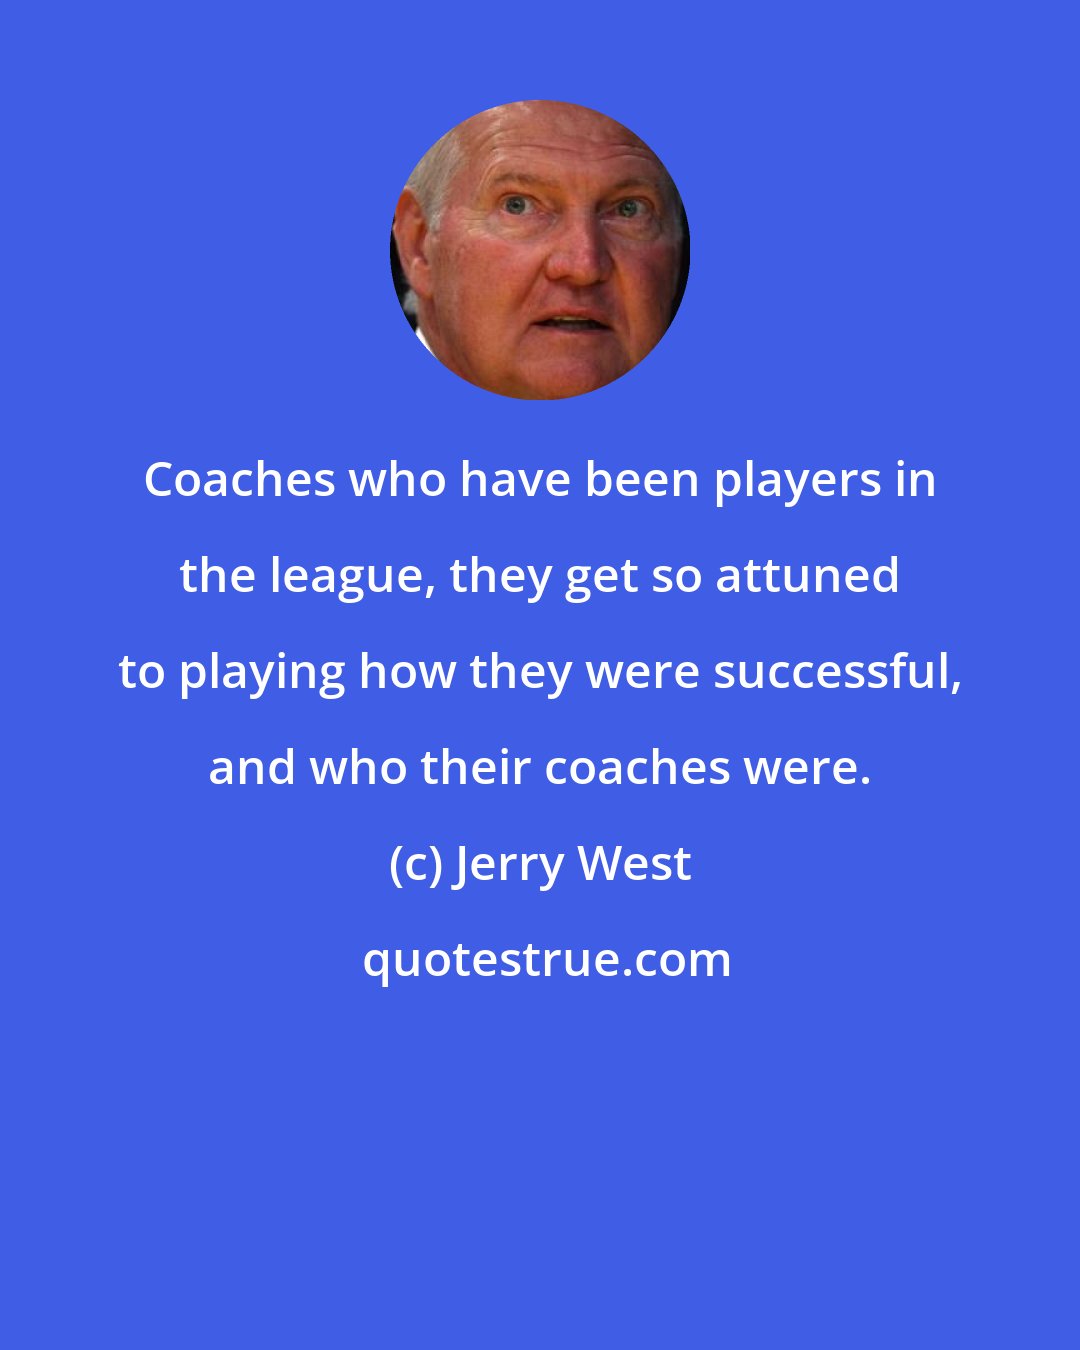 Jerry West: Coaches who have been players in the league, they get so attuned to playing how they were successful, and who their coaches were.